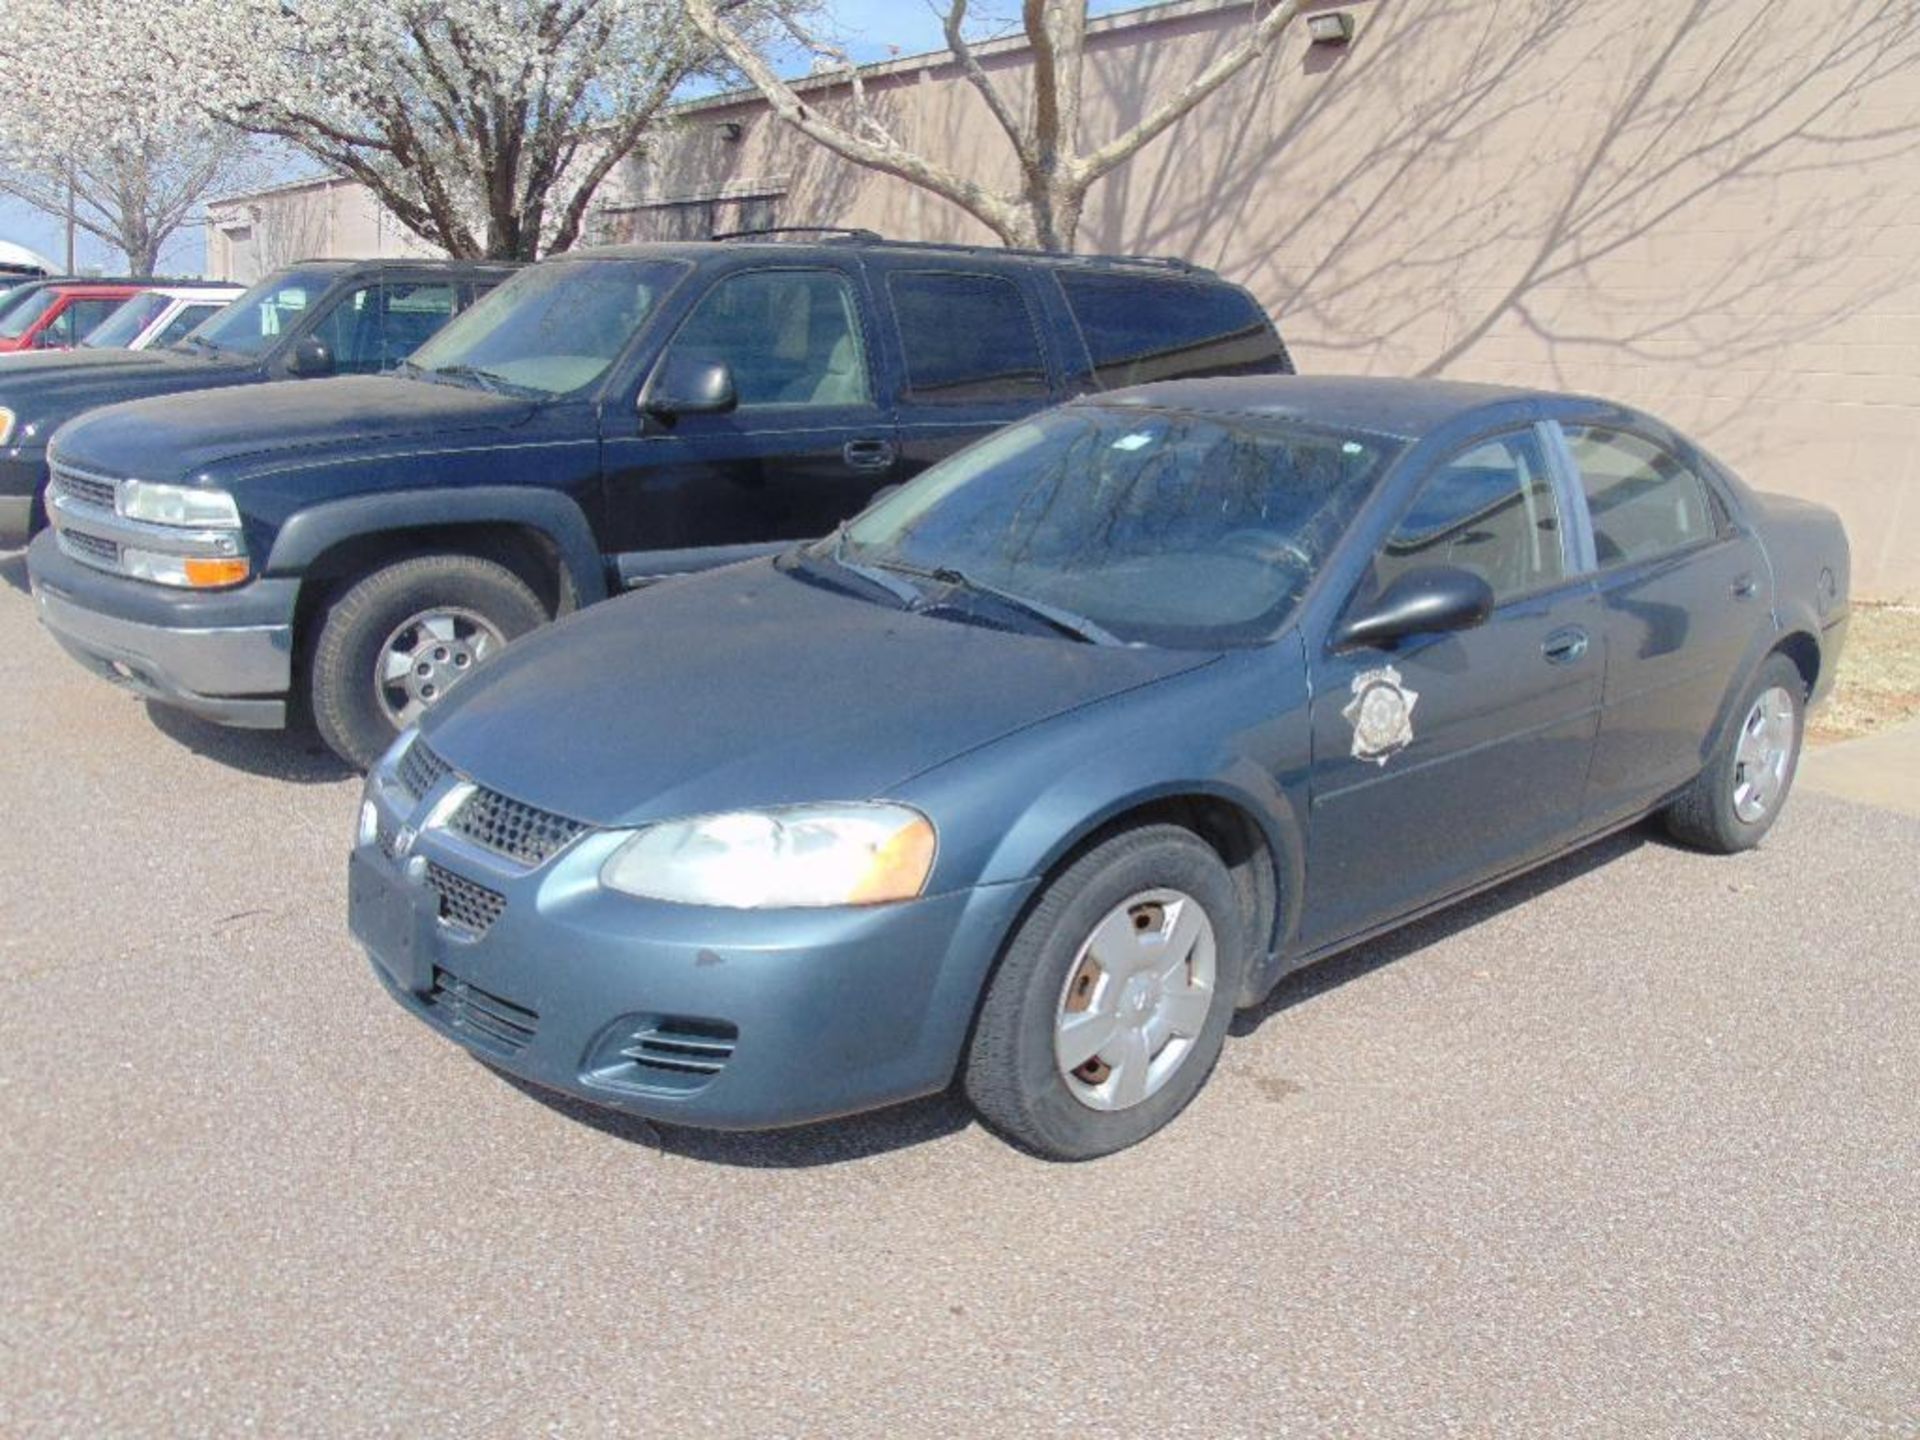 2006 Dodge Stratus s/n 1b3al46t36n229662, 2.7 liter gas eng, auto trans, odometer reads 192853 miles - Image 2 of 5